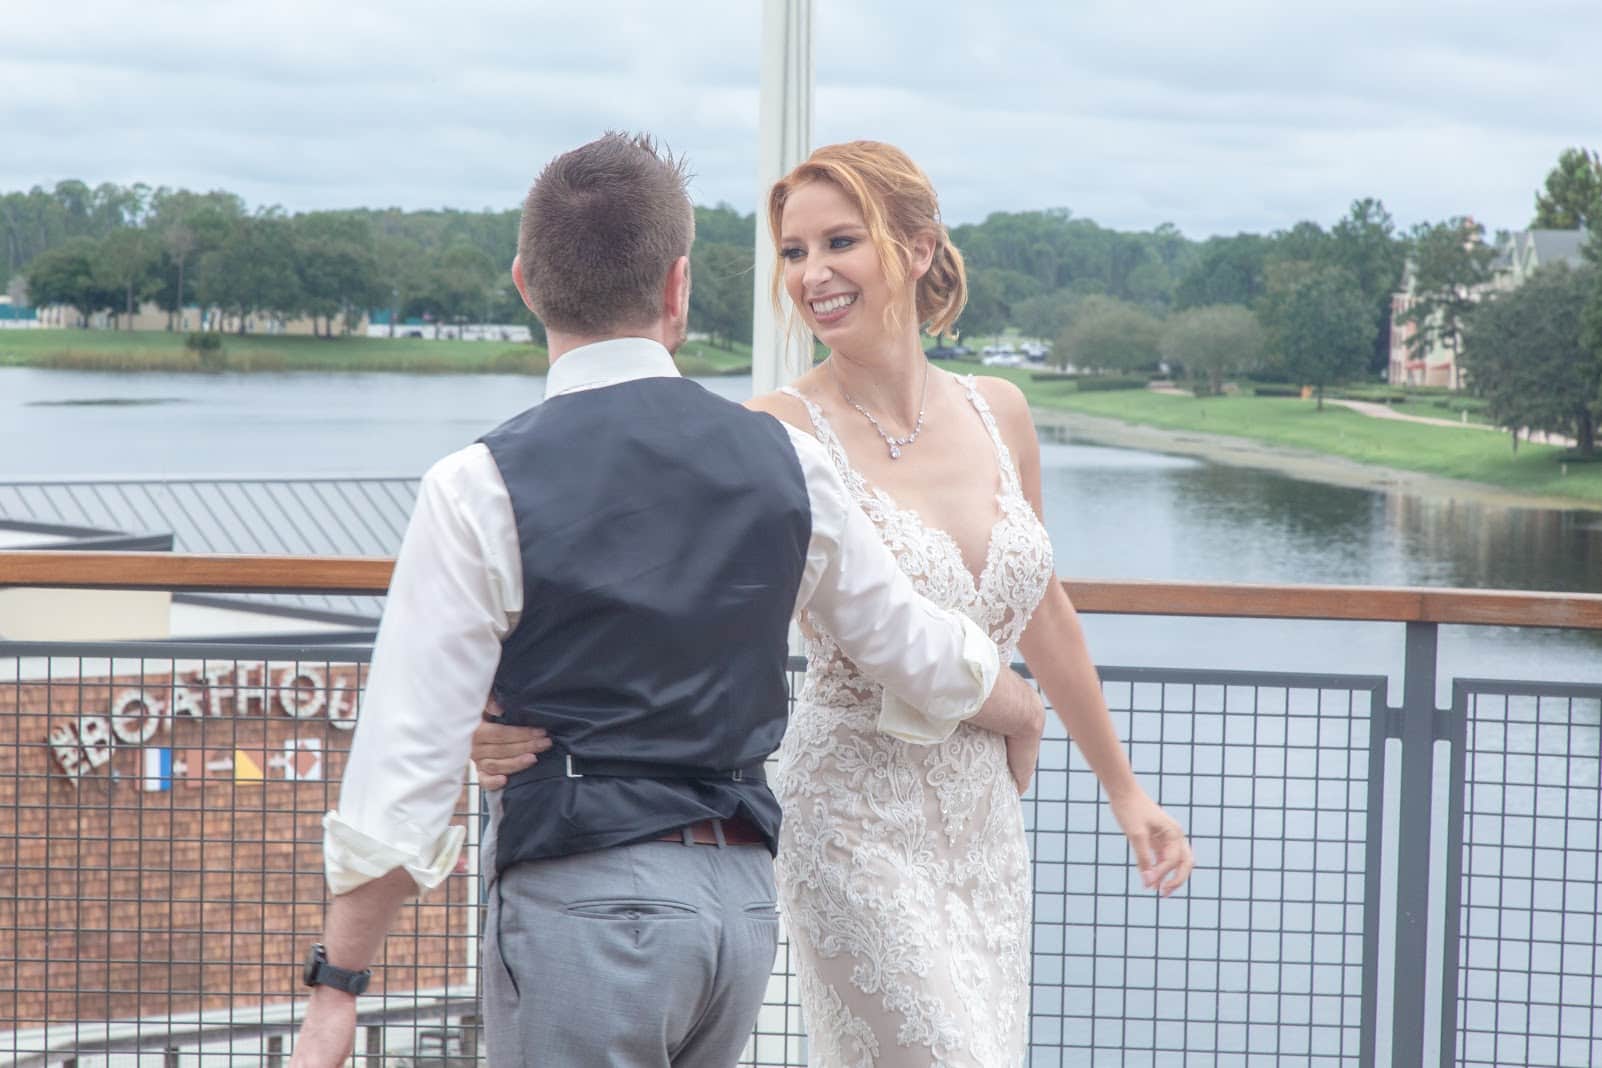 bride and groom dancing on patio of paddlefish overlooking water during wedding reception